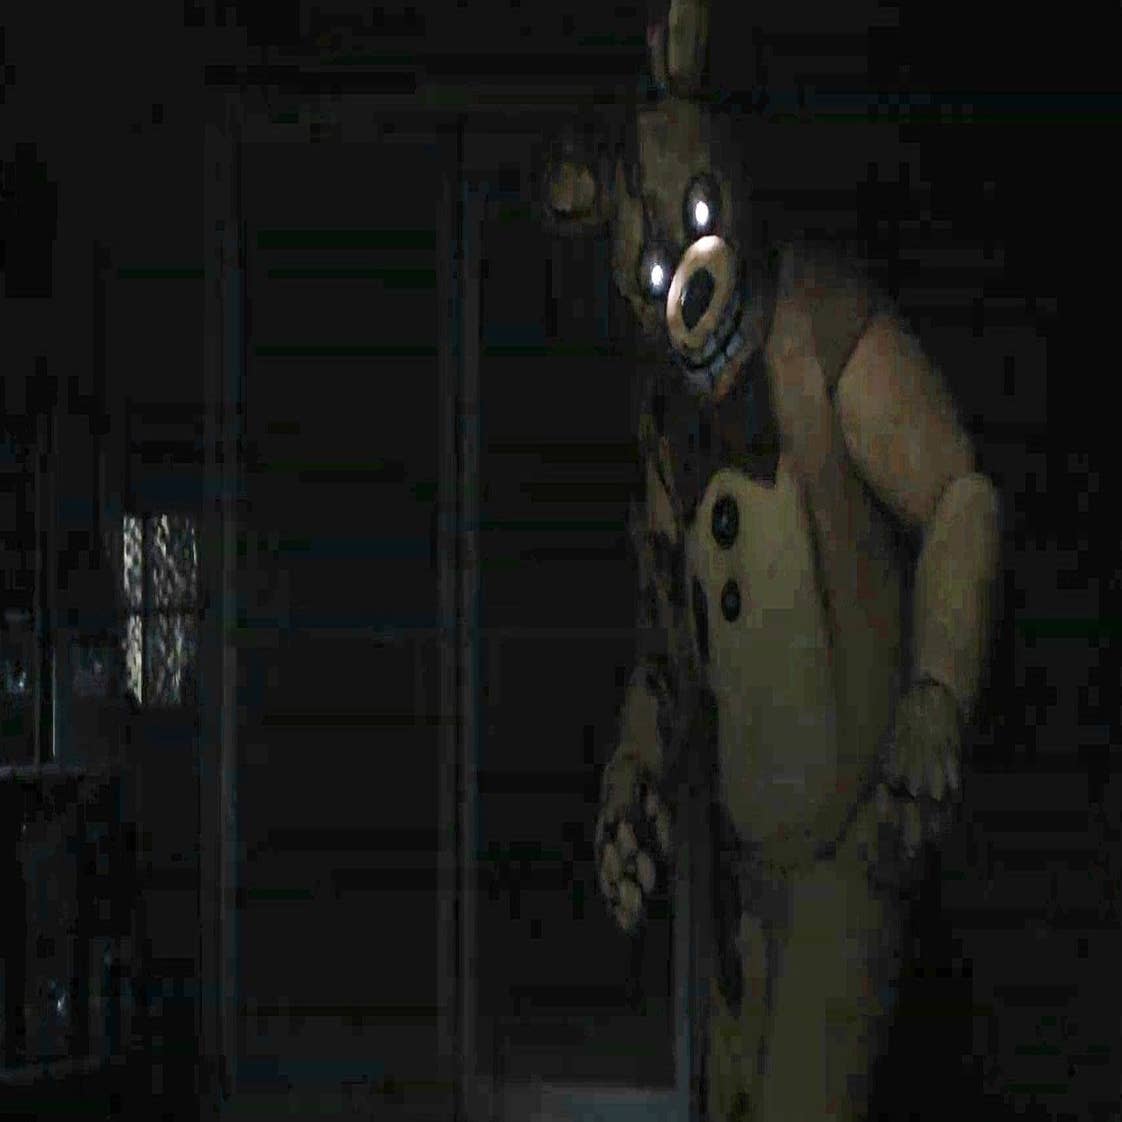 A realistic animatronic from the game five nights at freddy's in a